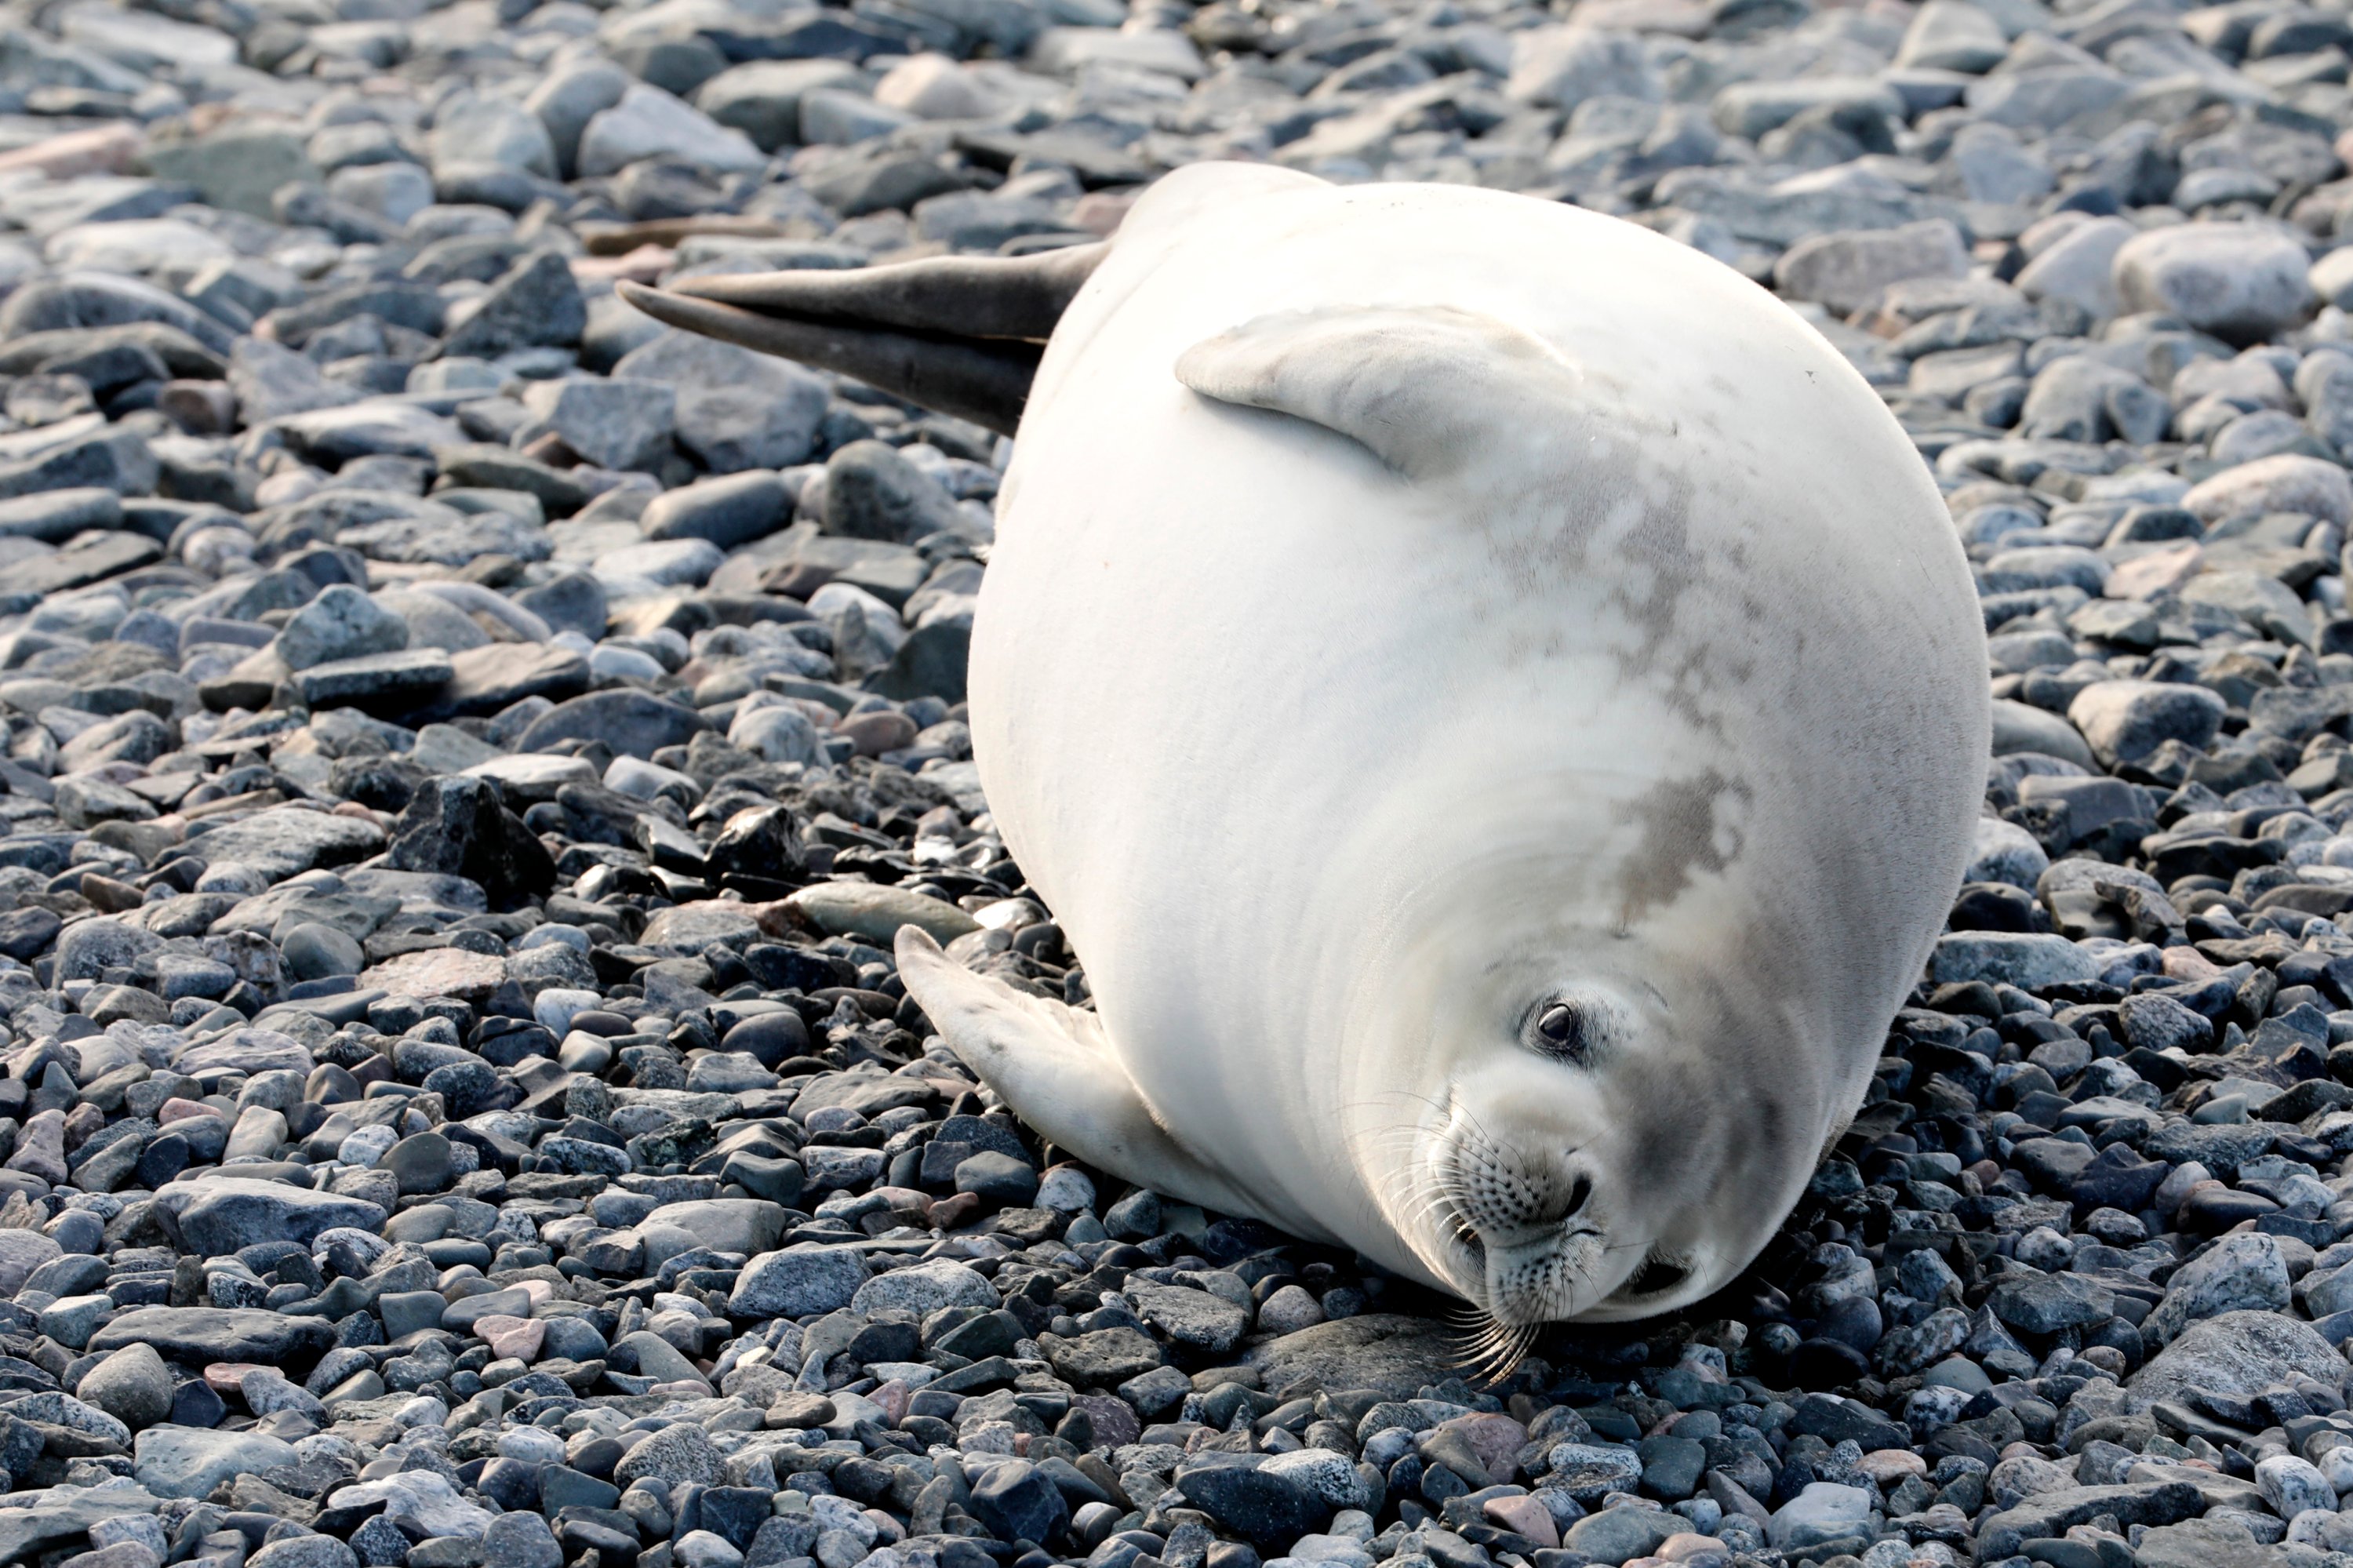 With a full belly, a seal rests on the shores of the pebble beach. (Photo by Hayrettin Bektaş)